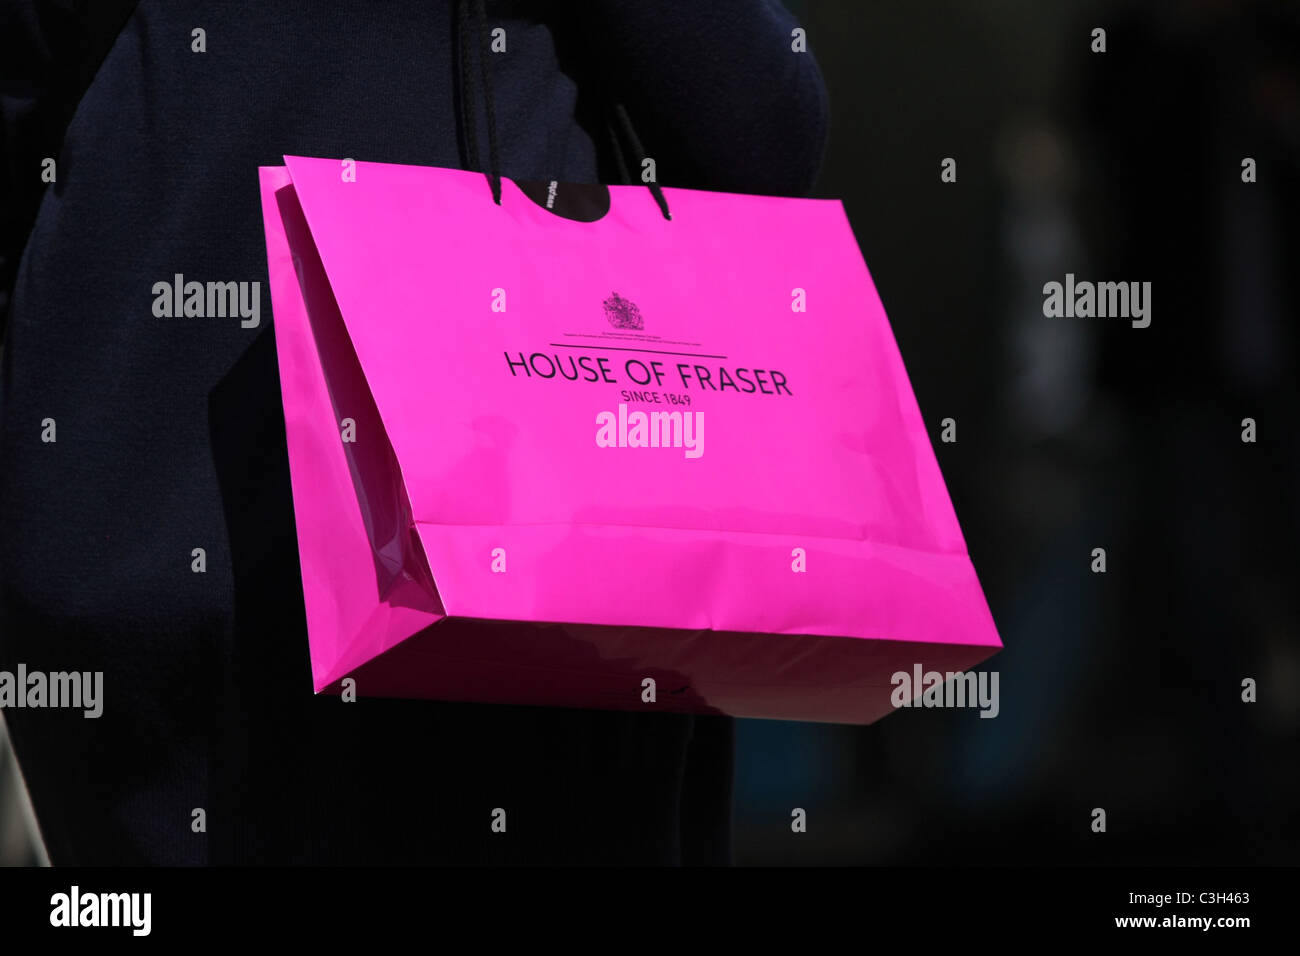 Shopping bag being carried in Oxford Street, London, England Stock Photo